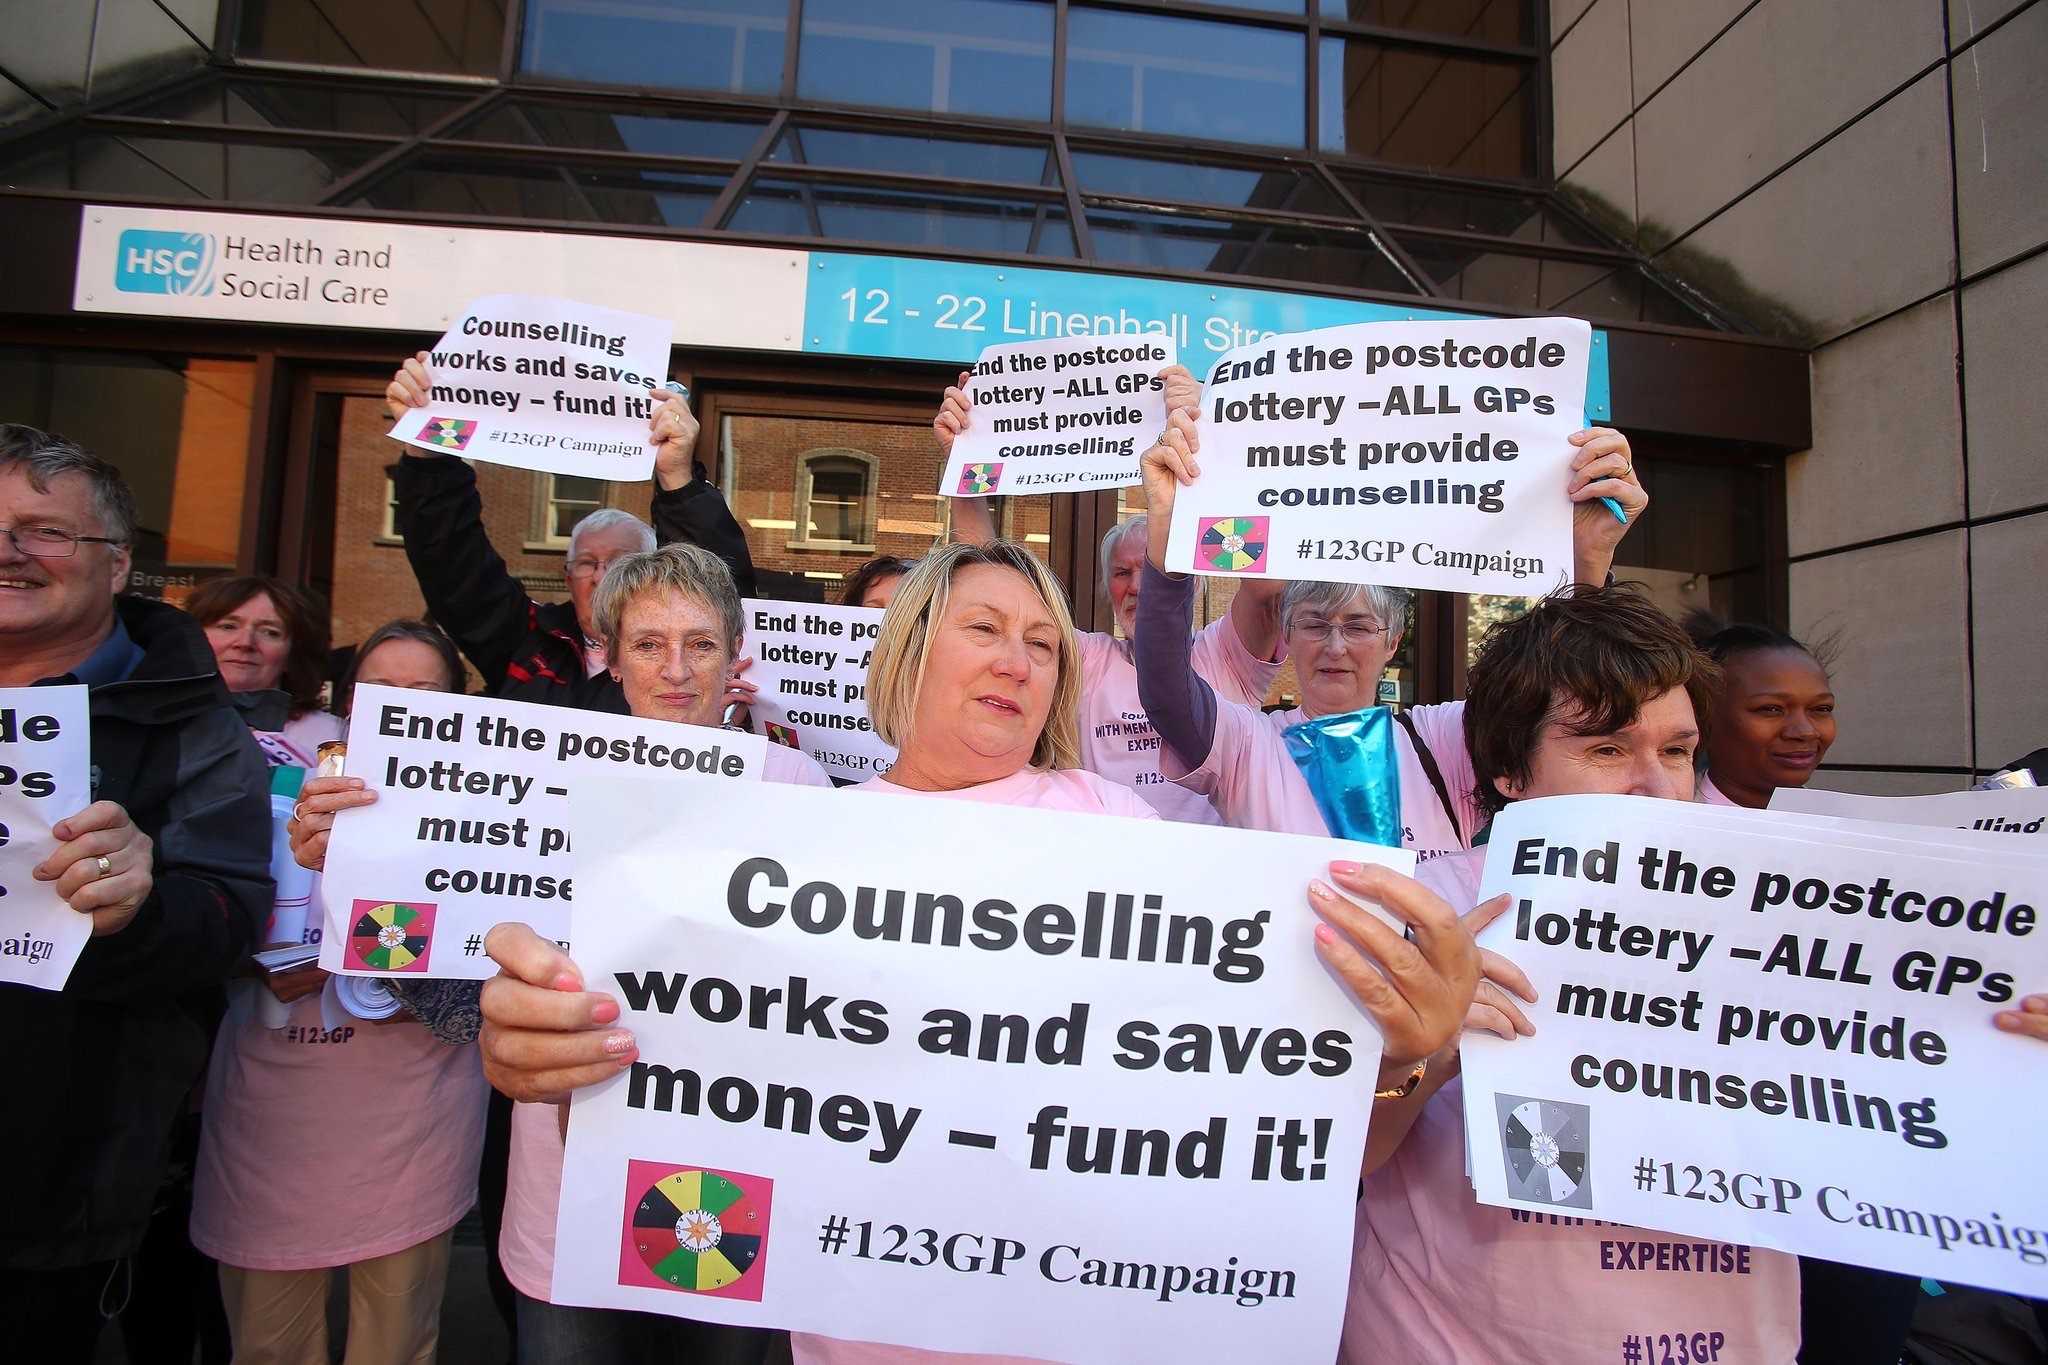 Mental Health Rights campaigners make their voices heard outside the HSC